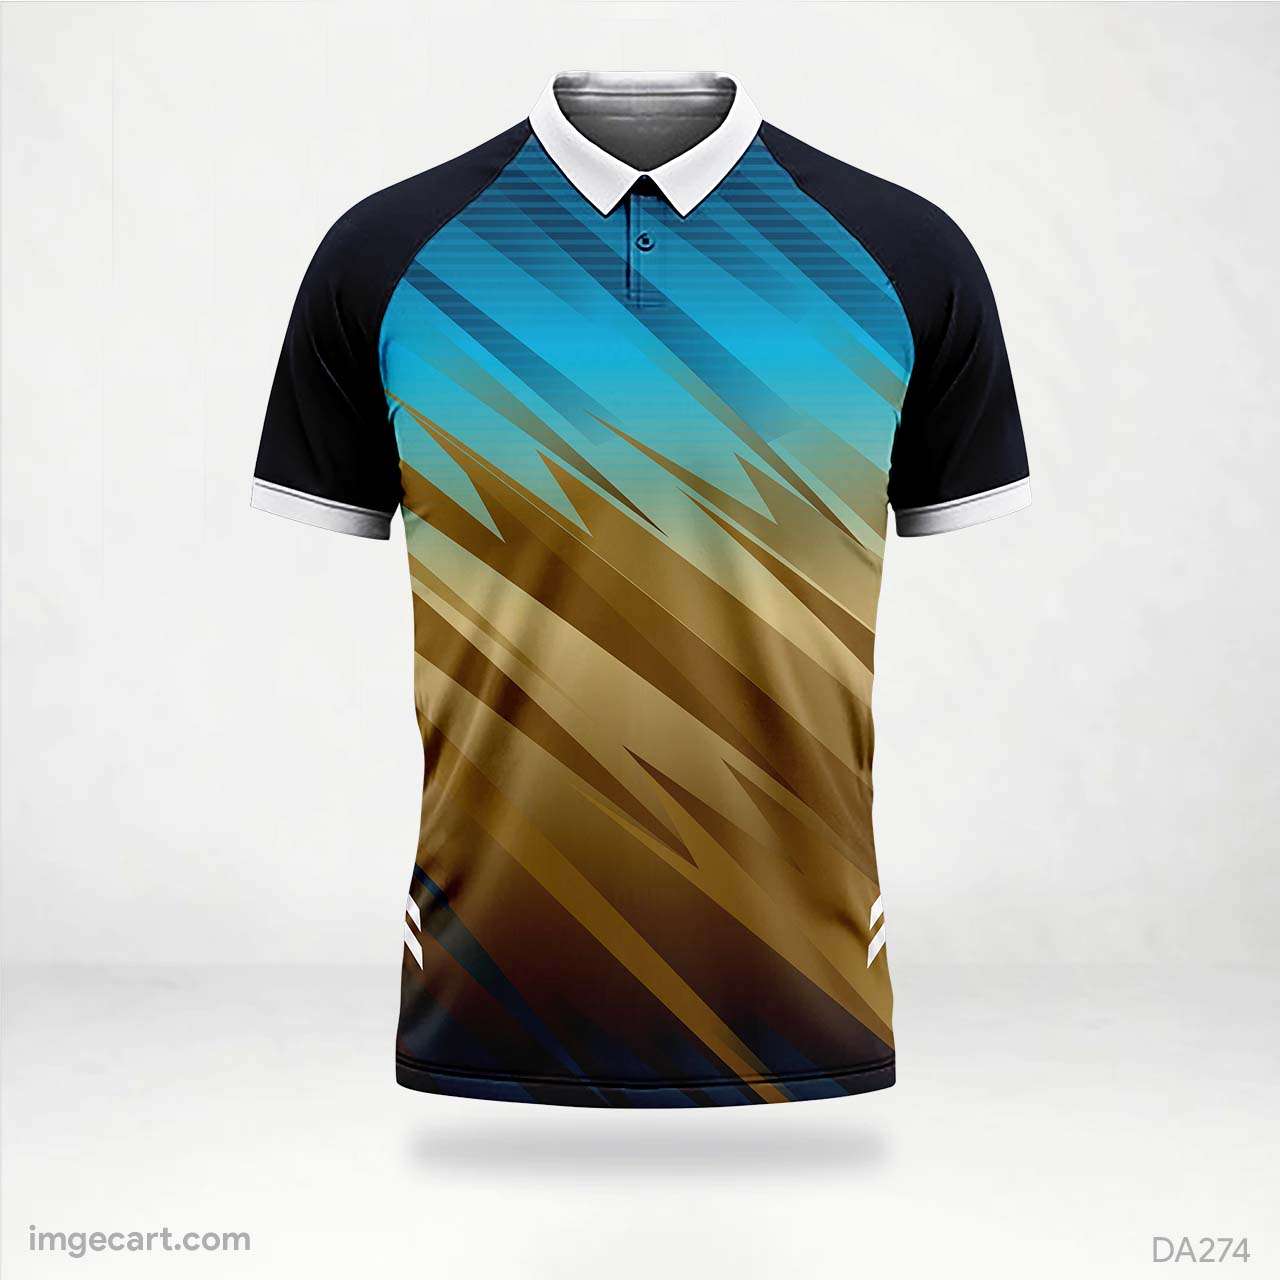 E-sports Jersey Design Blue with Brown Sublimation - imgecart